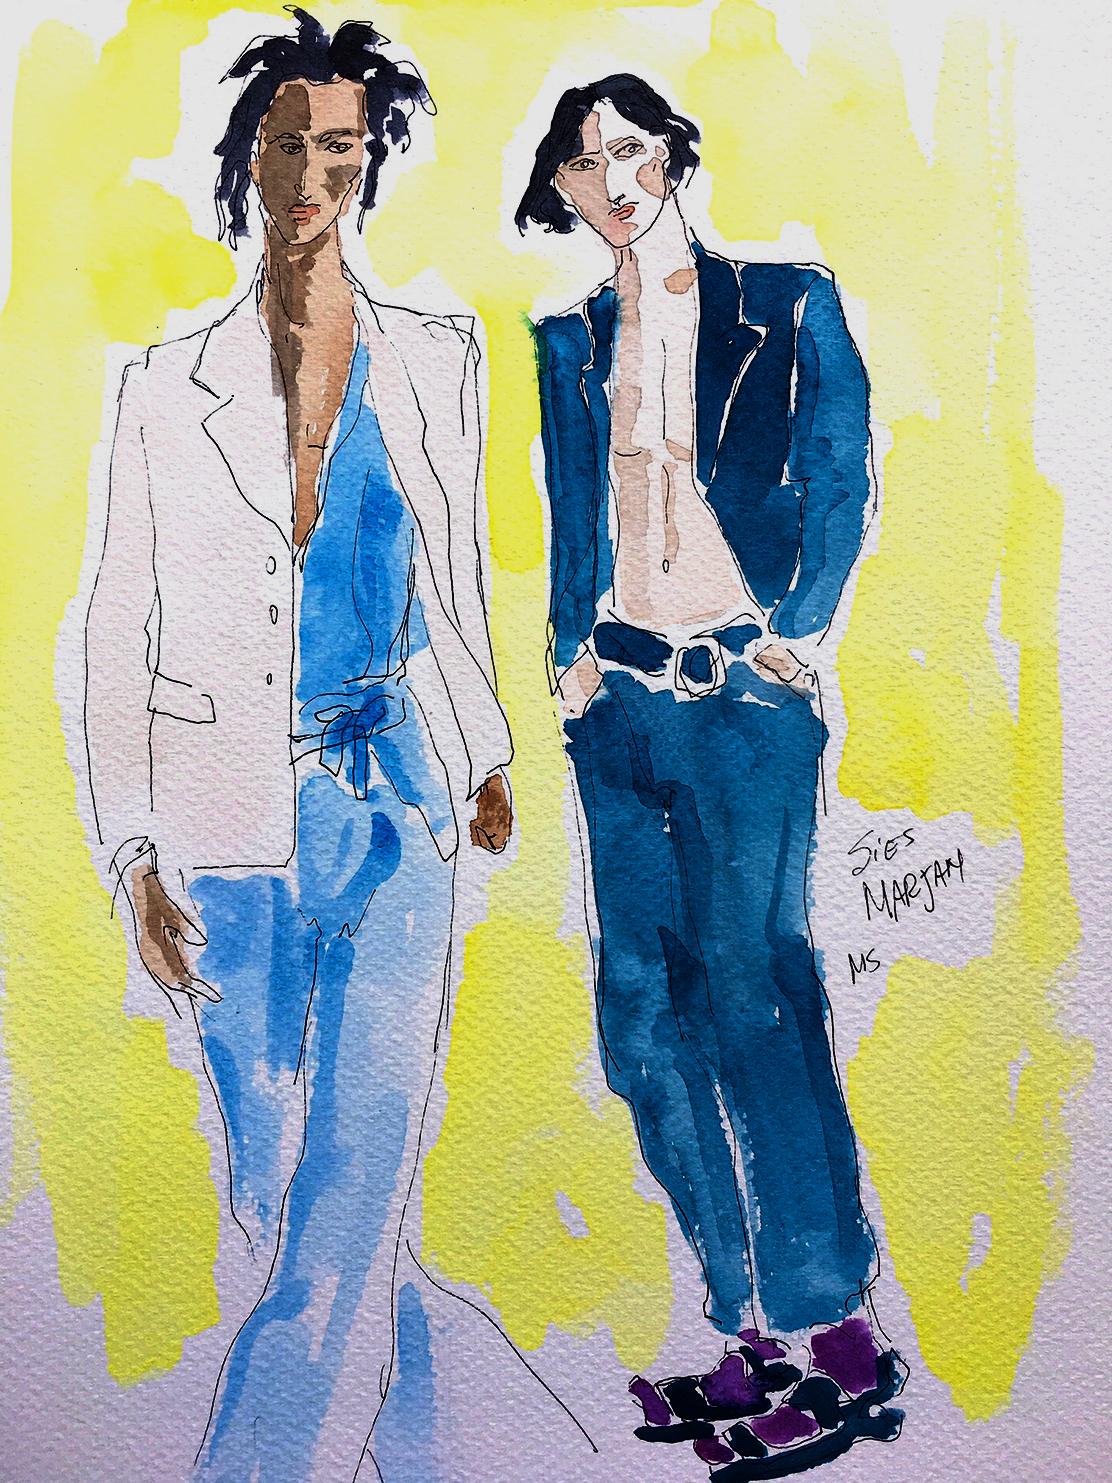 Sies Marjan, Fashio show models 2021 Ink pen and watercolor - Art by Manuel Santelices